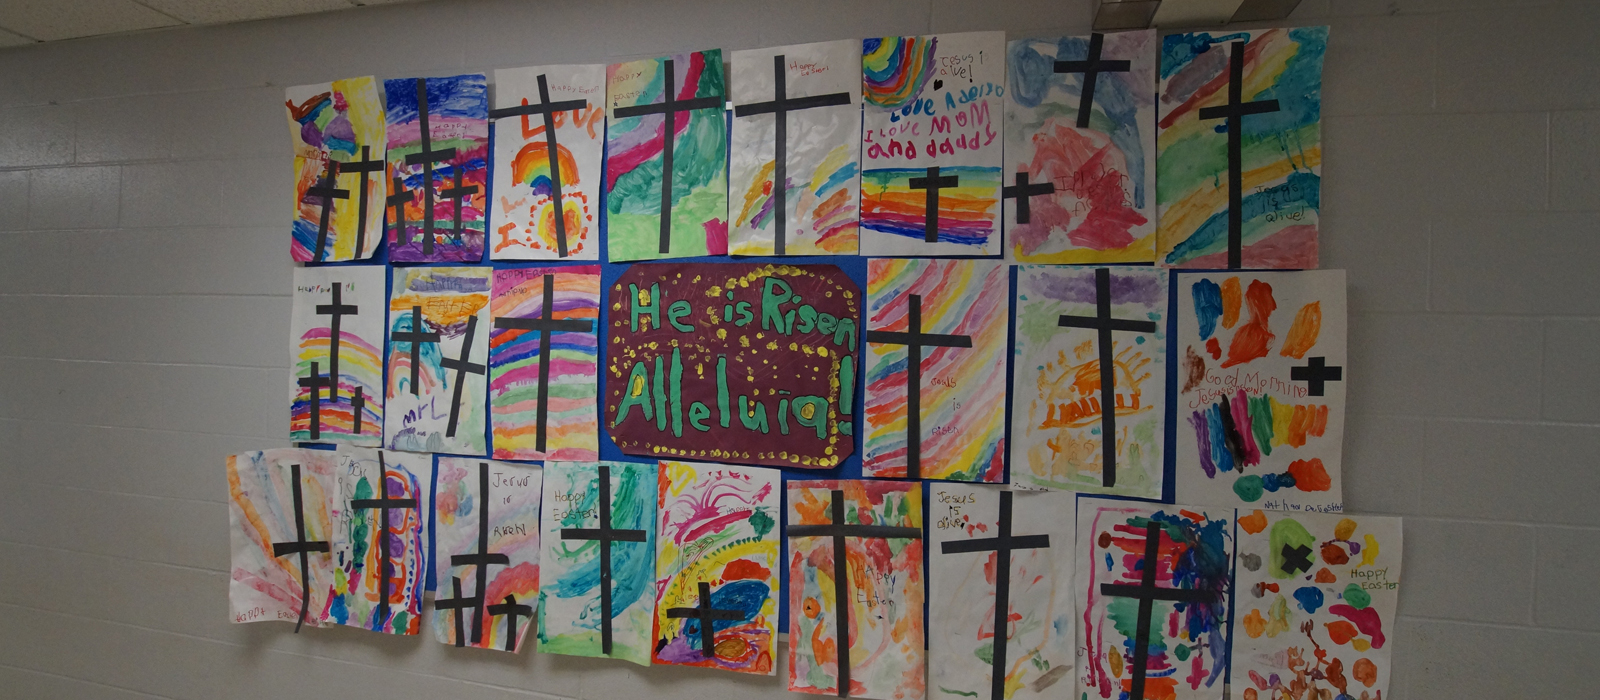 Decorative paintings with crosses and rainbow colours with "He is Risen, Alleluia!" painted in the middle.